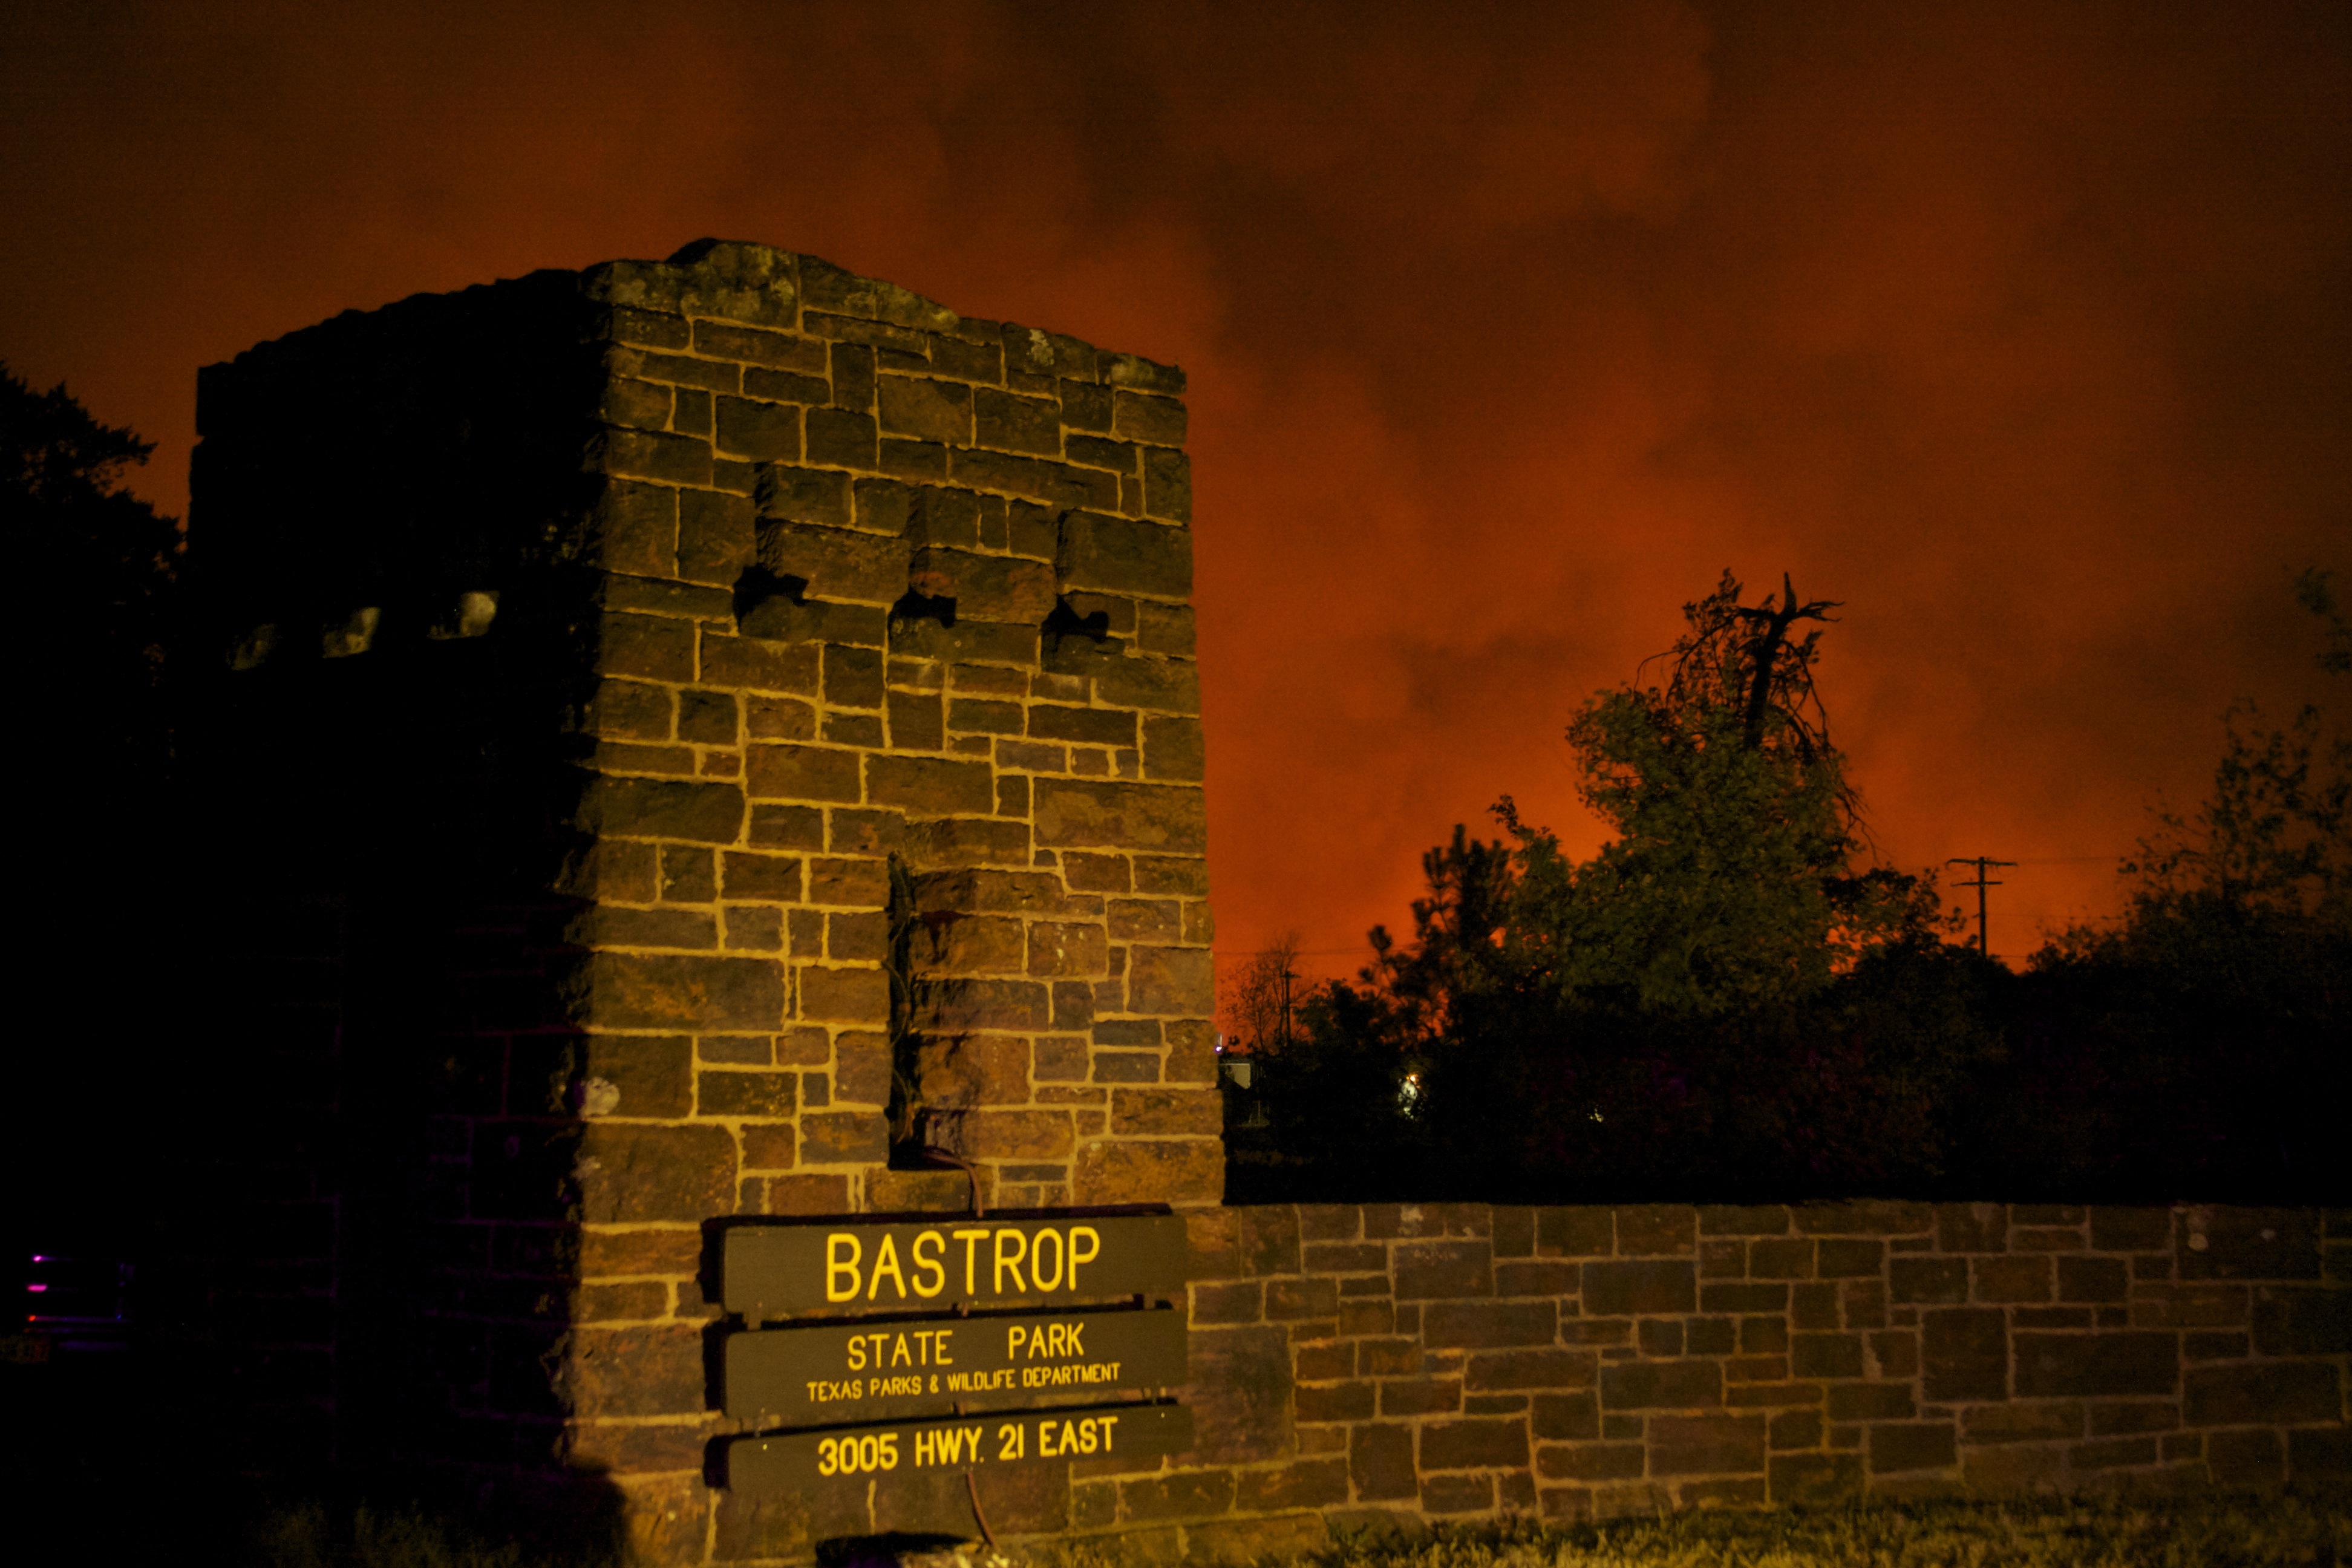 Bastrop State Park Entrance During the Fire